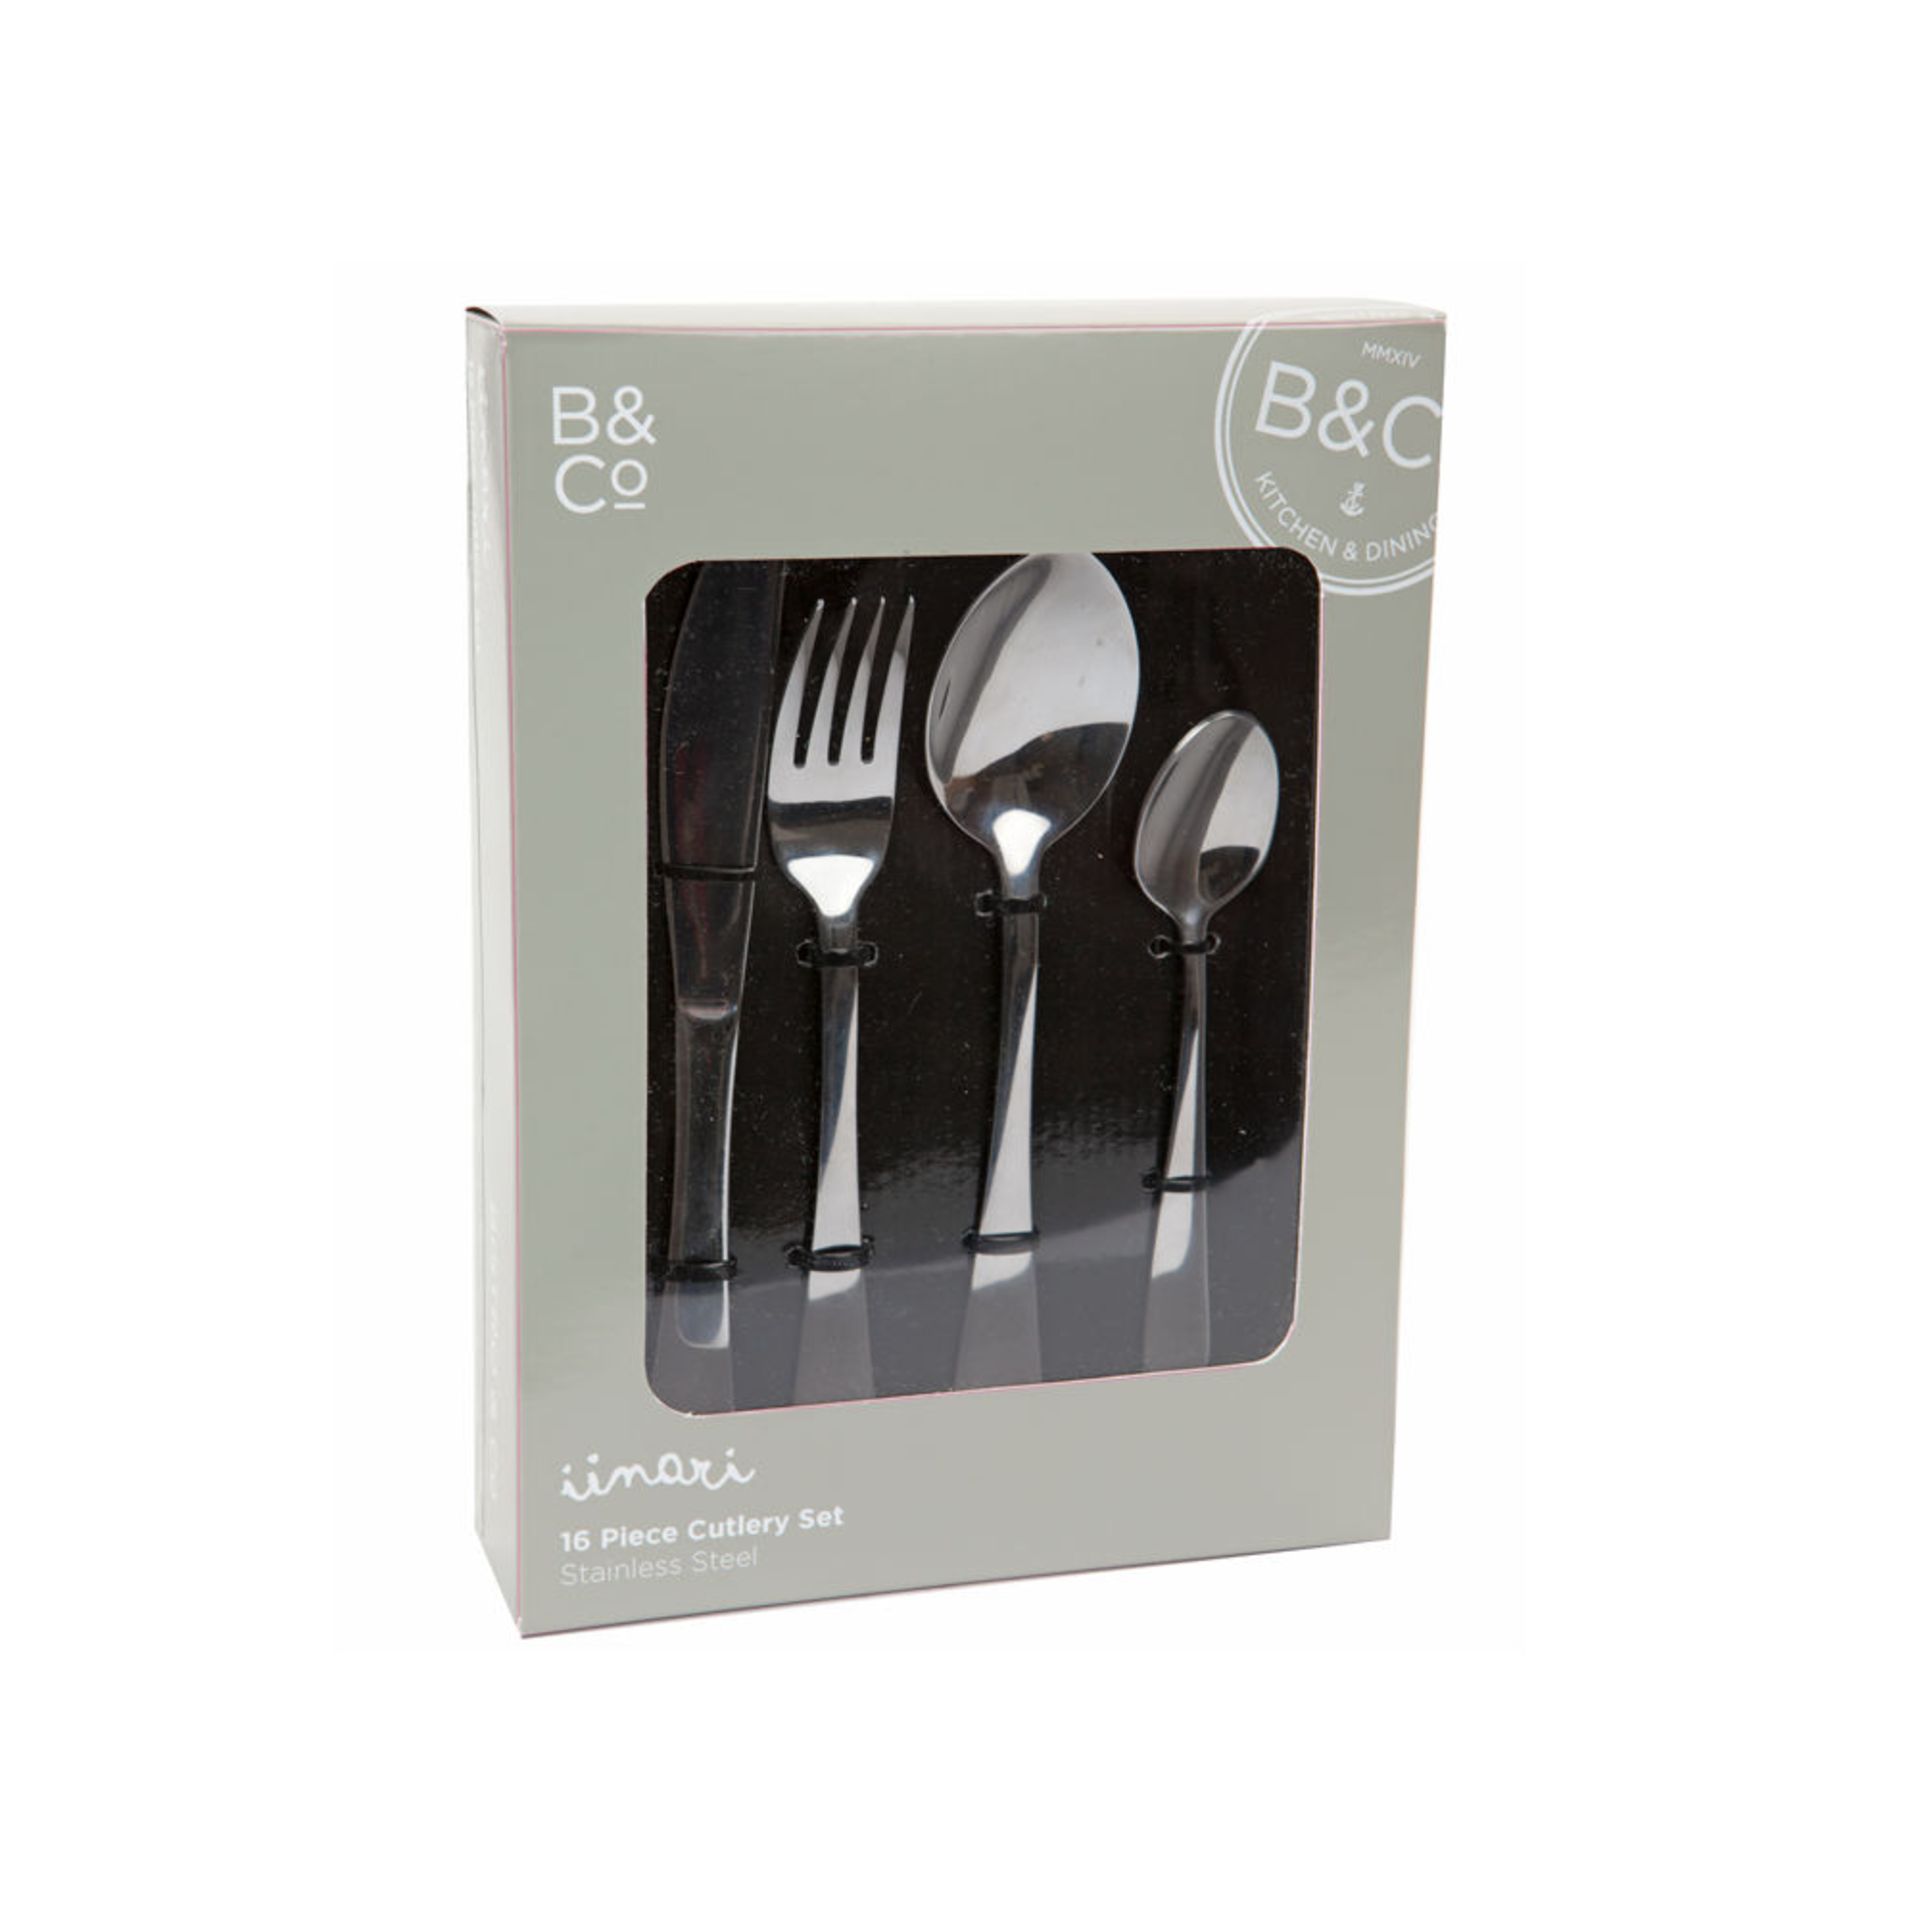 V *TRADE QTY* Brand New Bistro & Co Linari 16 Piece Stainless Steel Cutlery Set X 8 YOUR BID PRICE